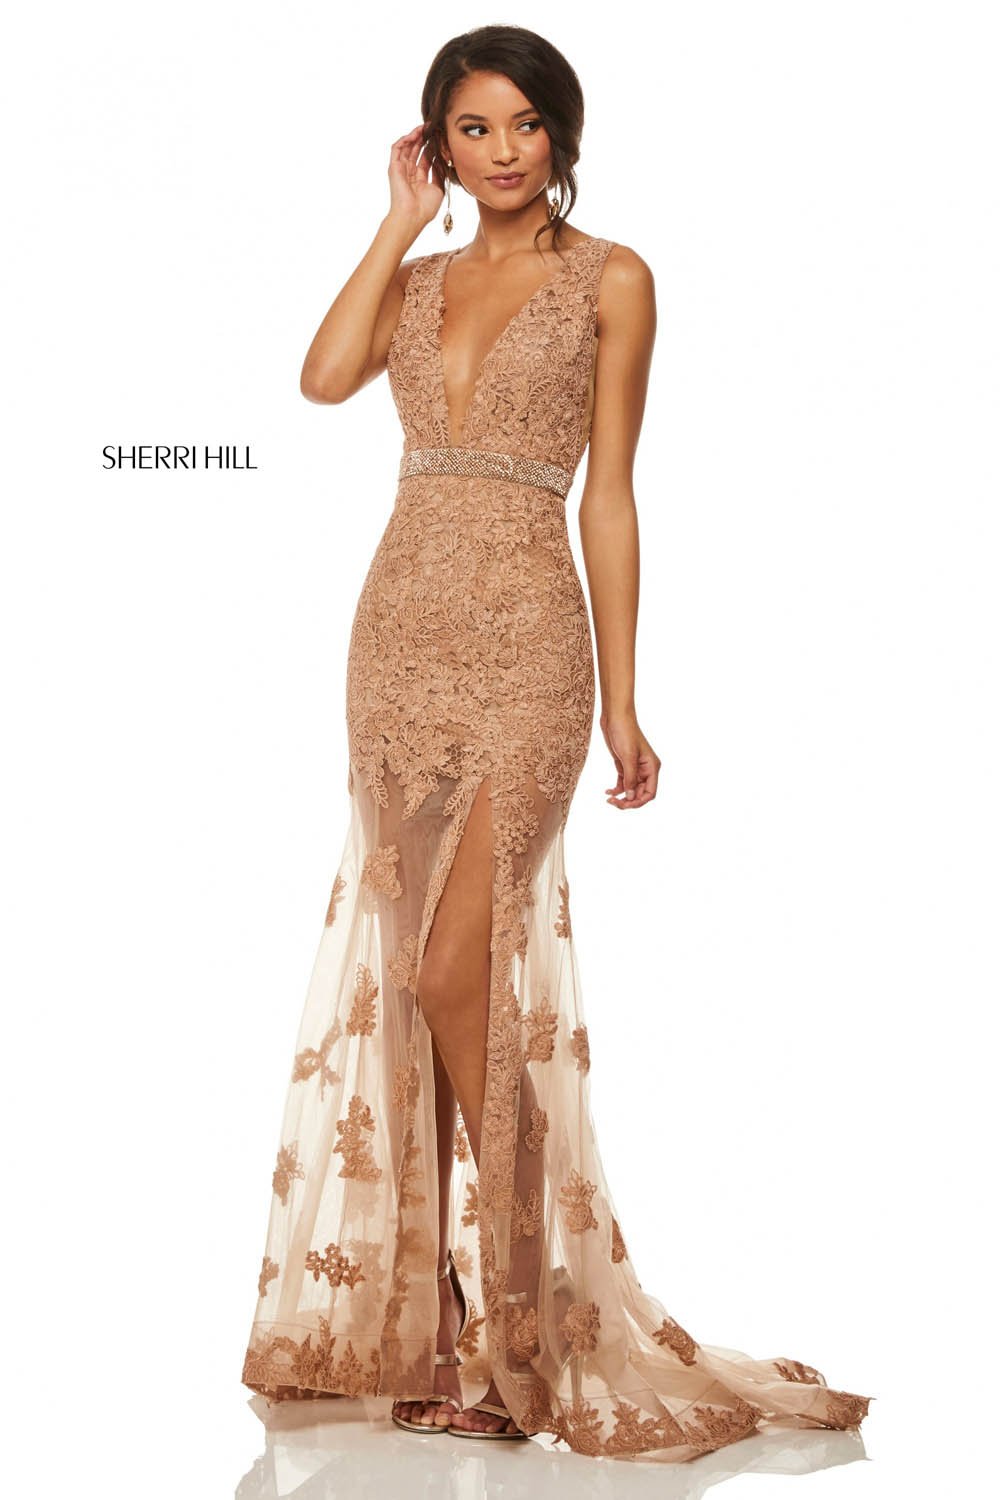 Sherri Hill 52875 dress images in these colors: Light Blue, Red, Blush, Mocha, Black, Ivory.